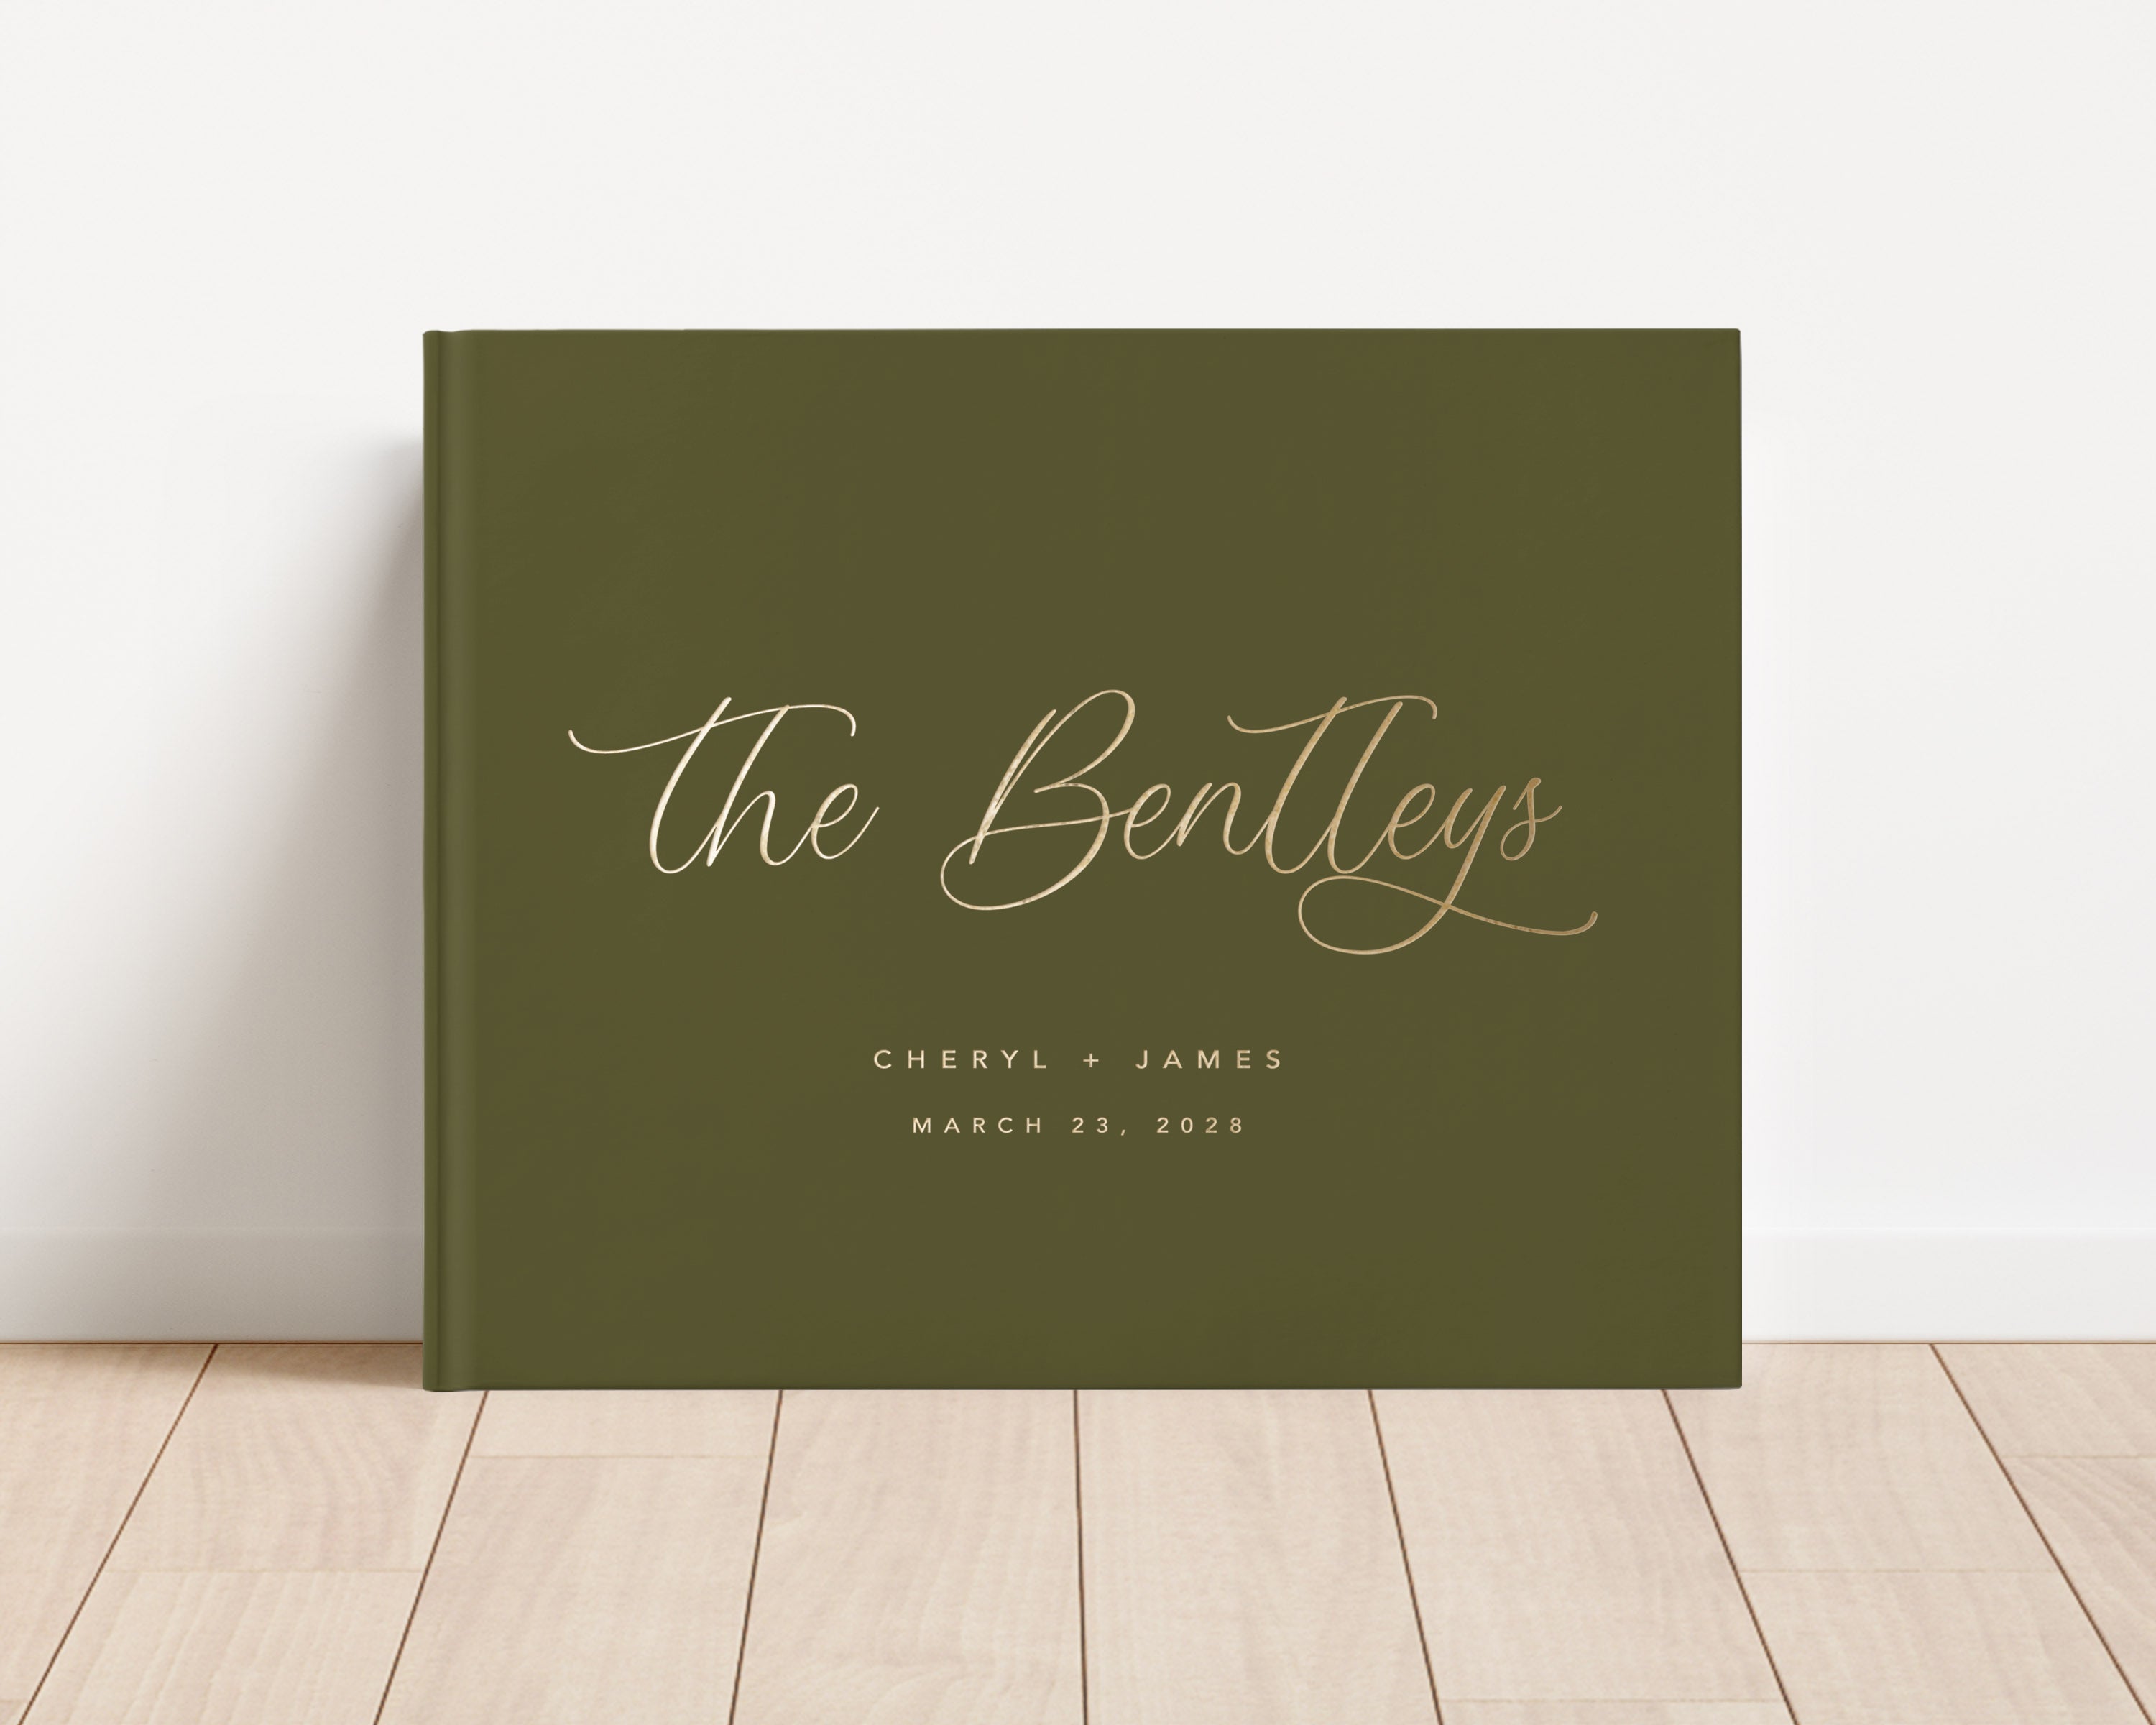 Luxury wedding guest book with custom gold foil text and green hardback cover.